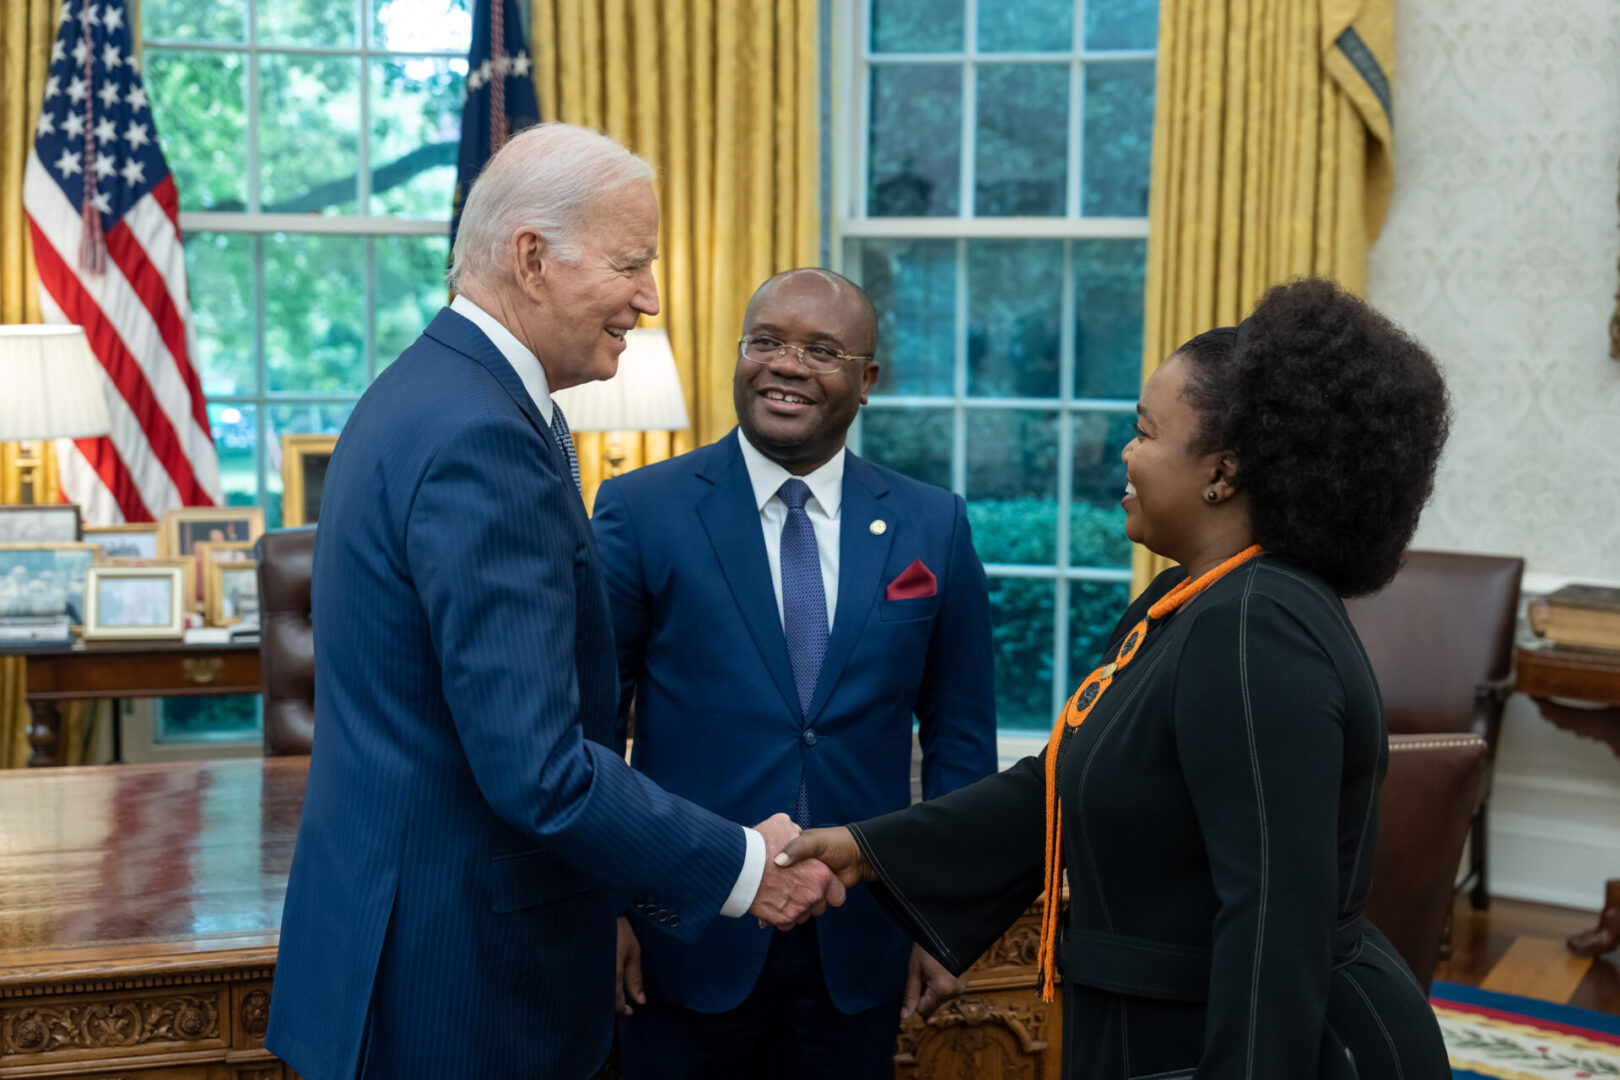 President Joe Biden participates in a photo line during an ambassador credentialing ceremony, Friday, June 30, 2023, in the Oval Office of the White House. (Official White House Photo by Adam Schultz)